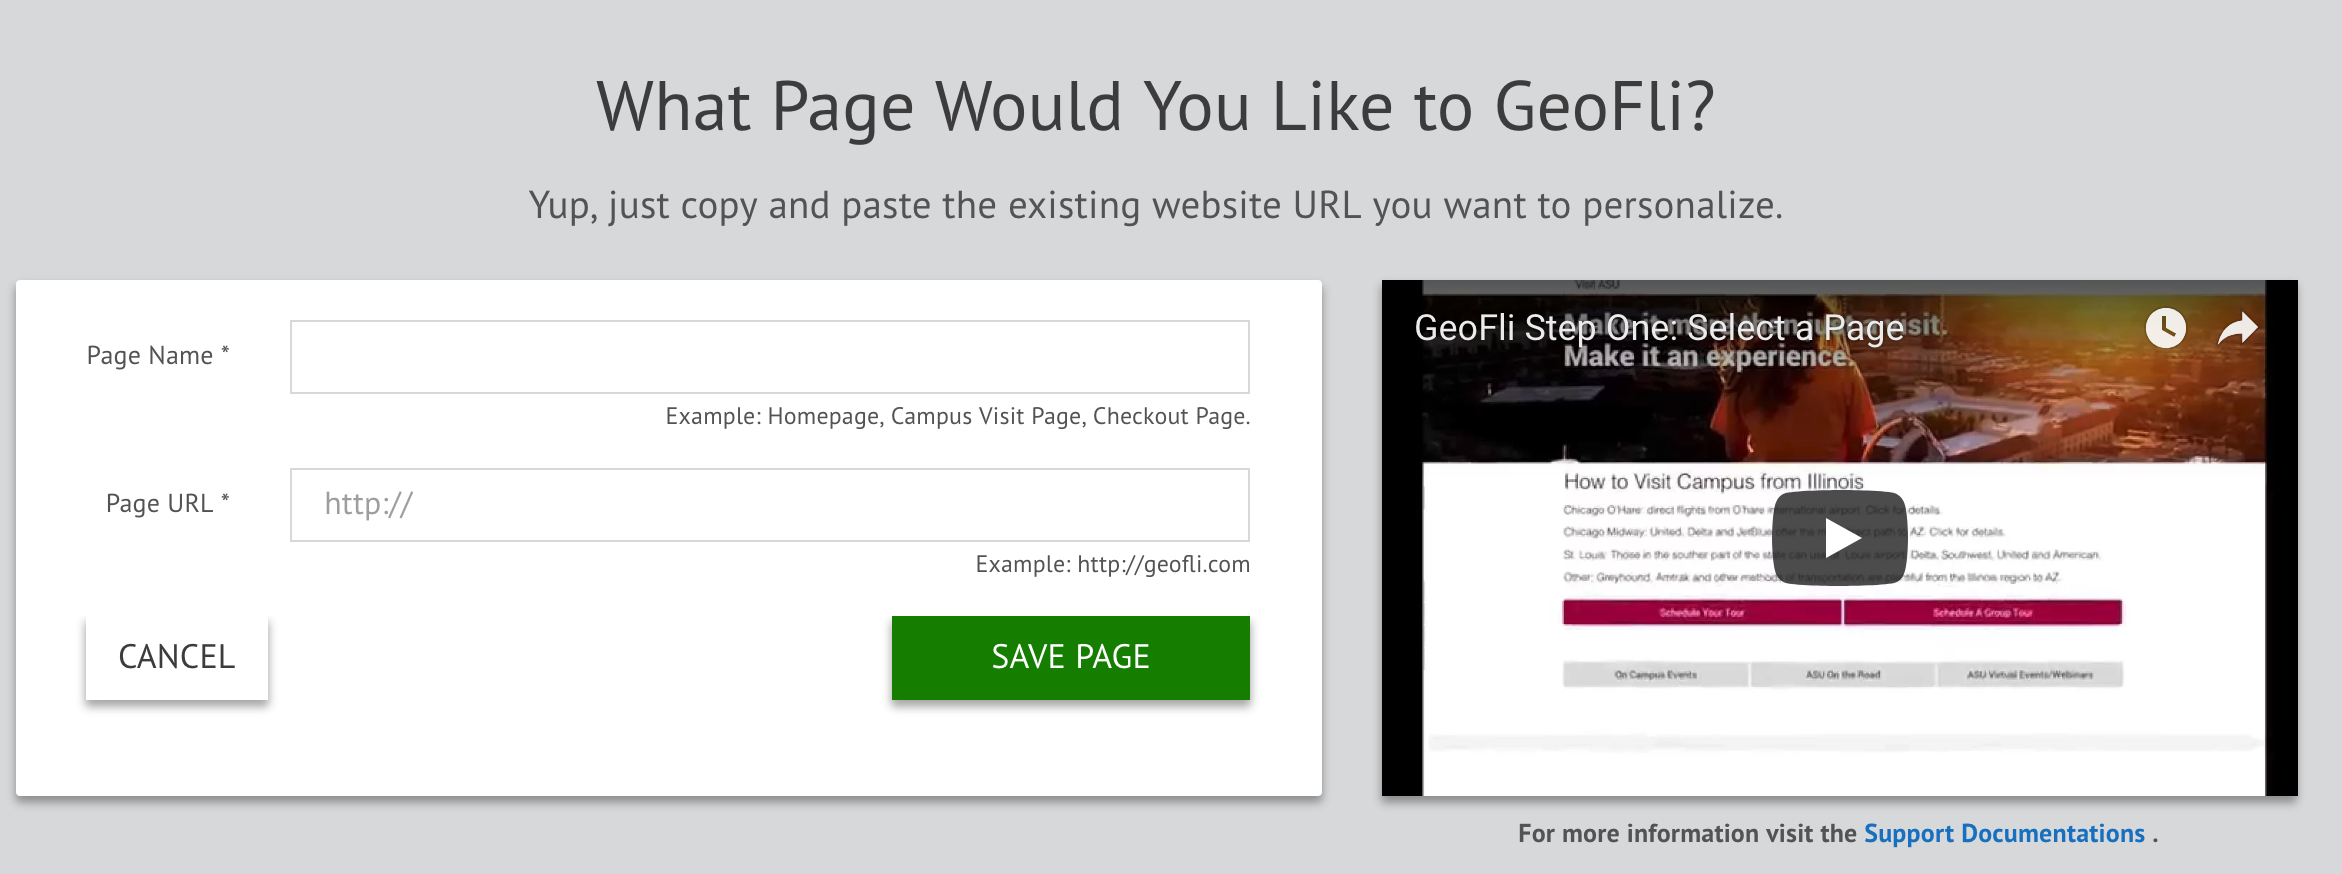 What page would you like to GeoFli?